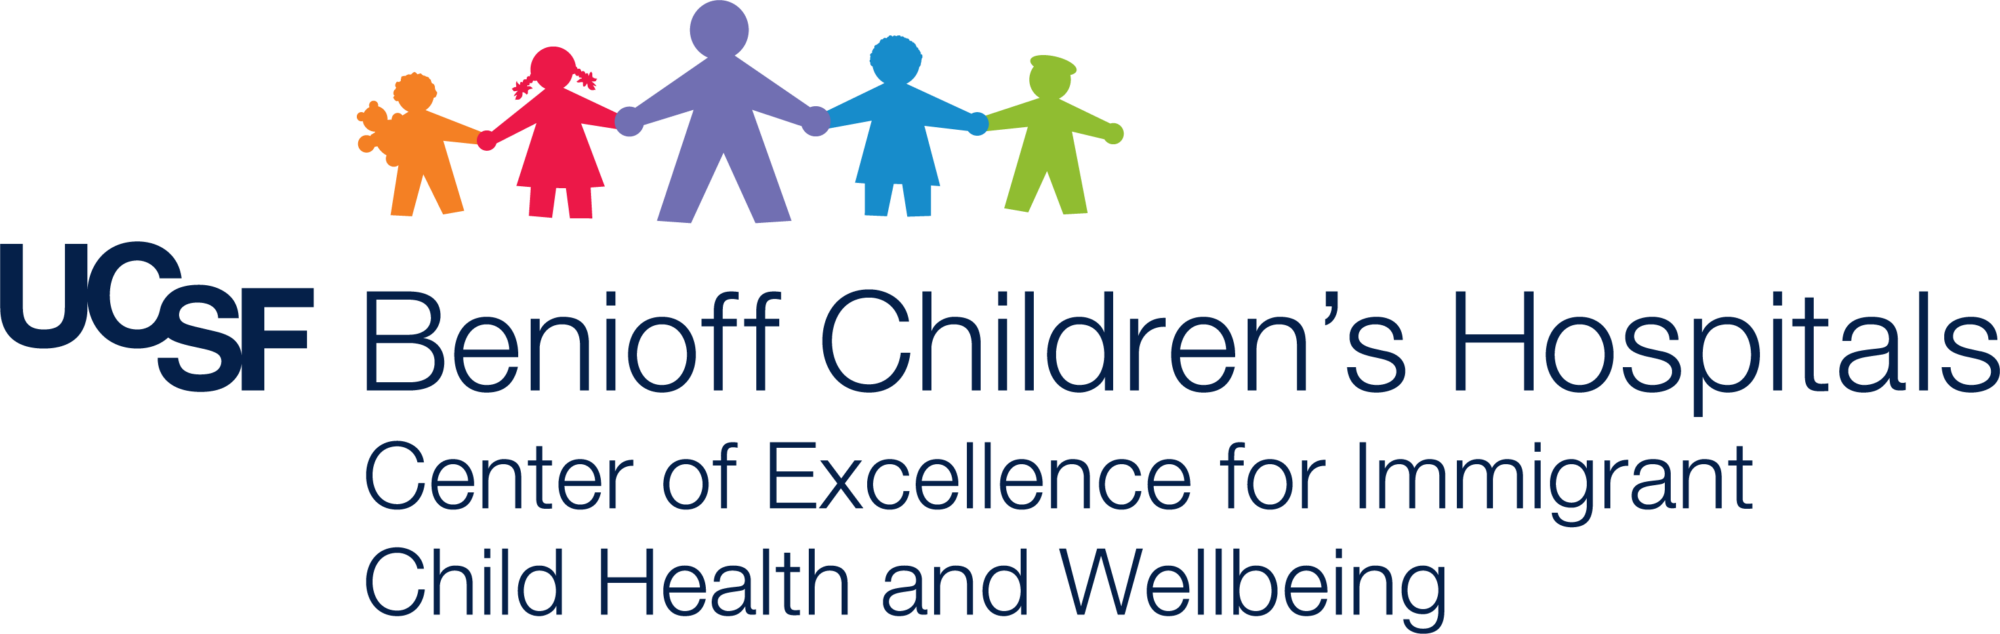 Center of Excellence for Immigrant Child Health & Wellbeing